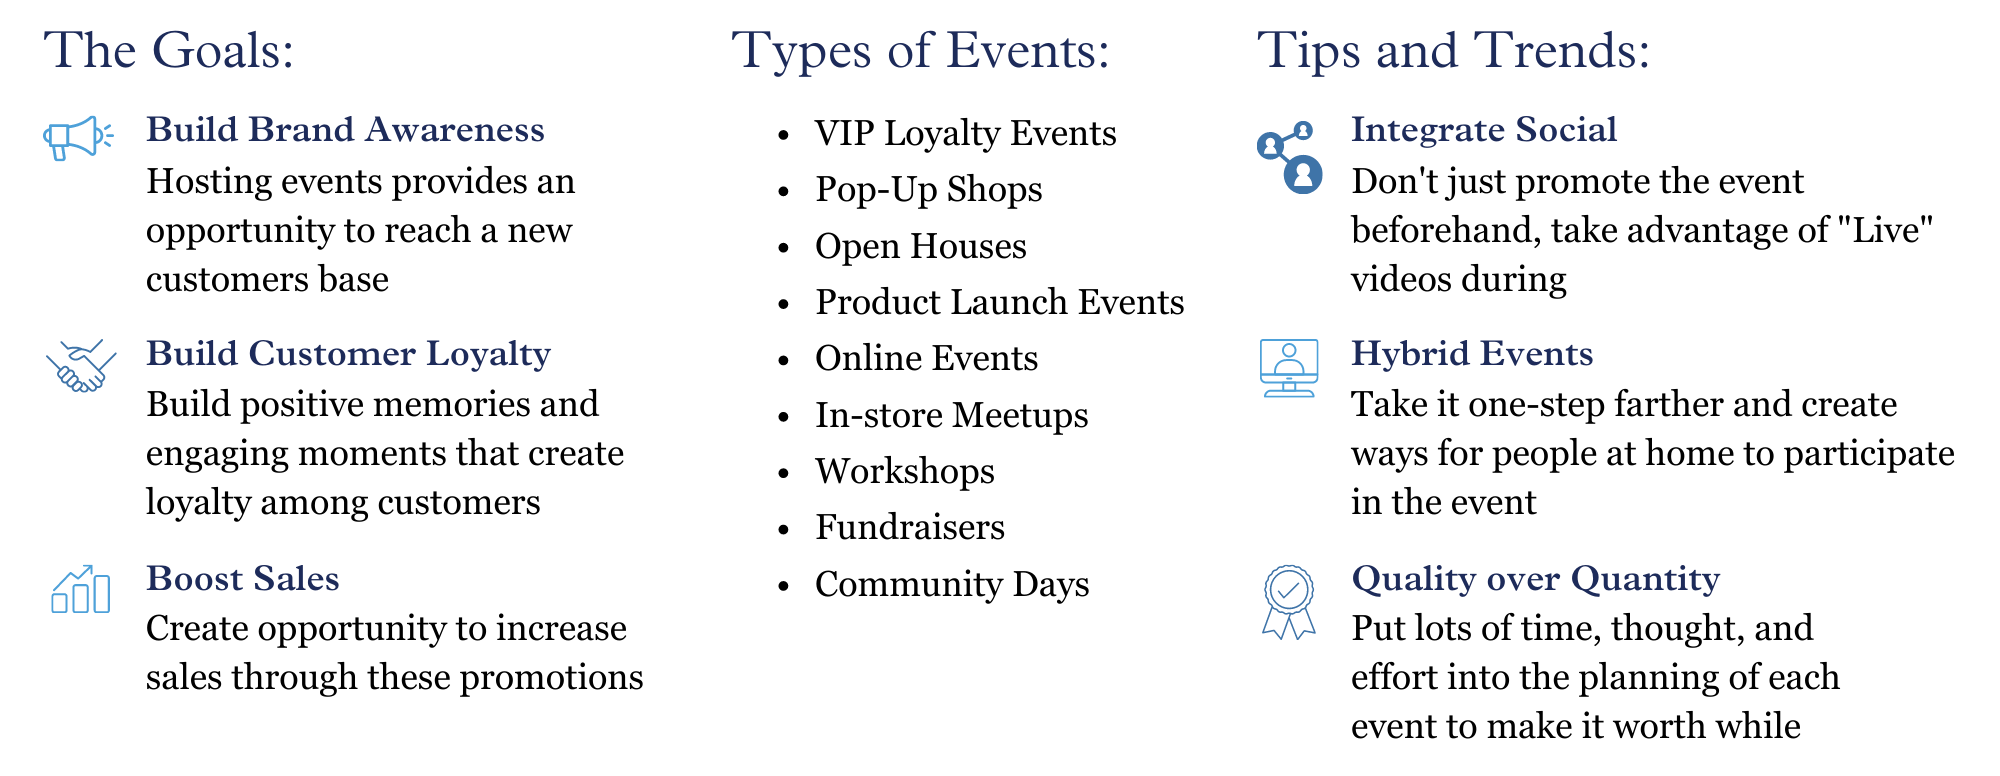 A quick look at the goals, types of events, and tips for event marketing.